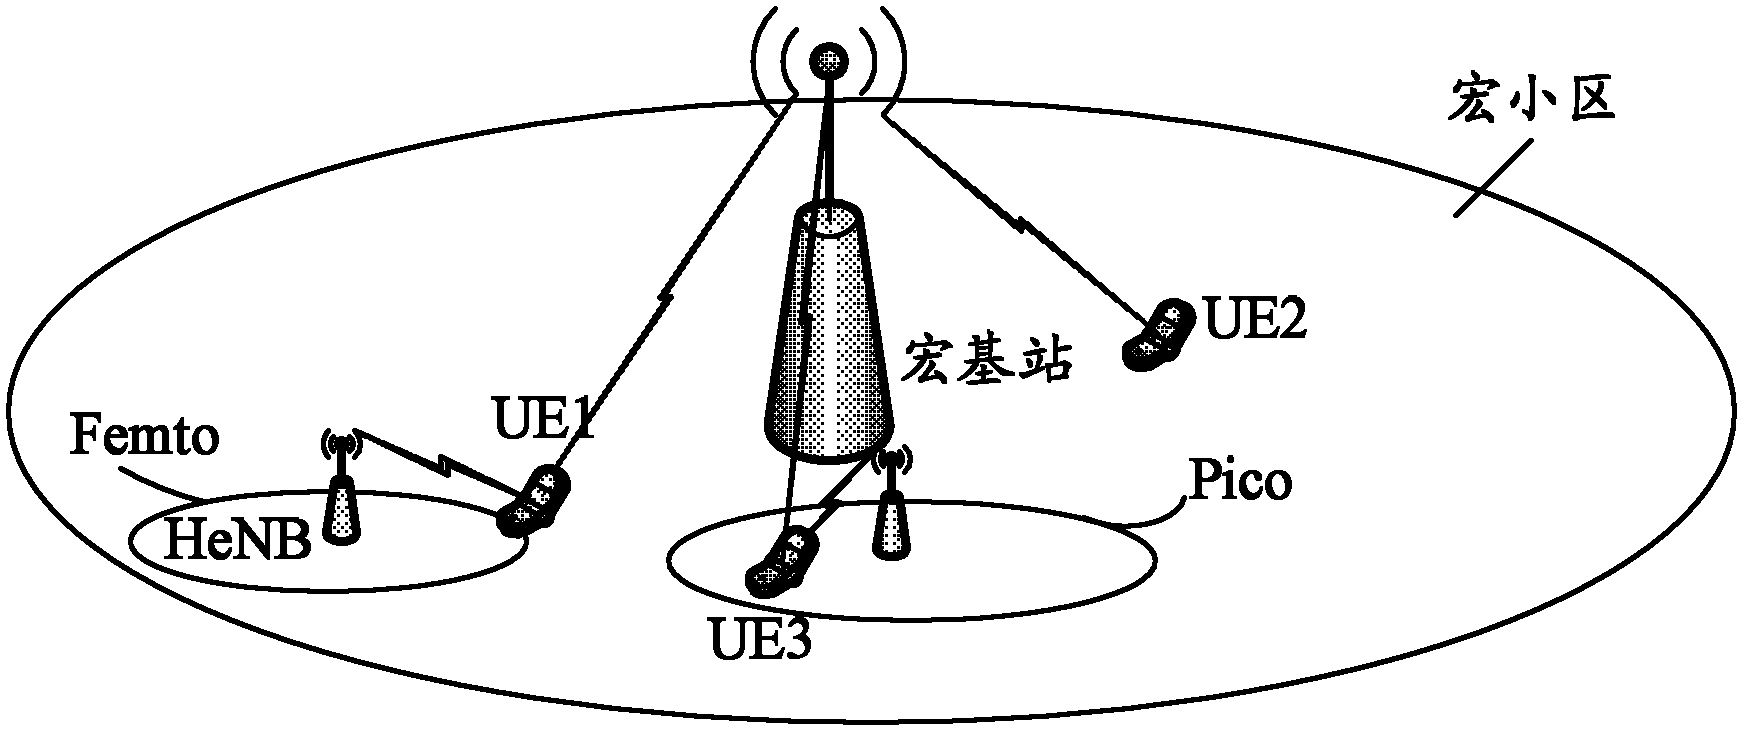 Discontinuous reception method, user equipment (UE) and base station